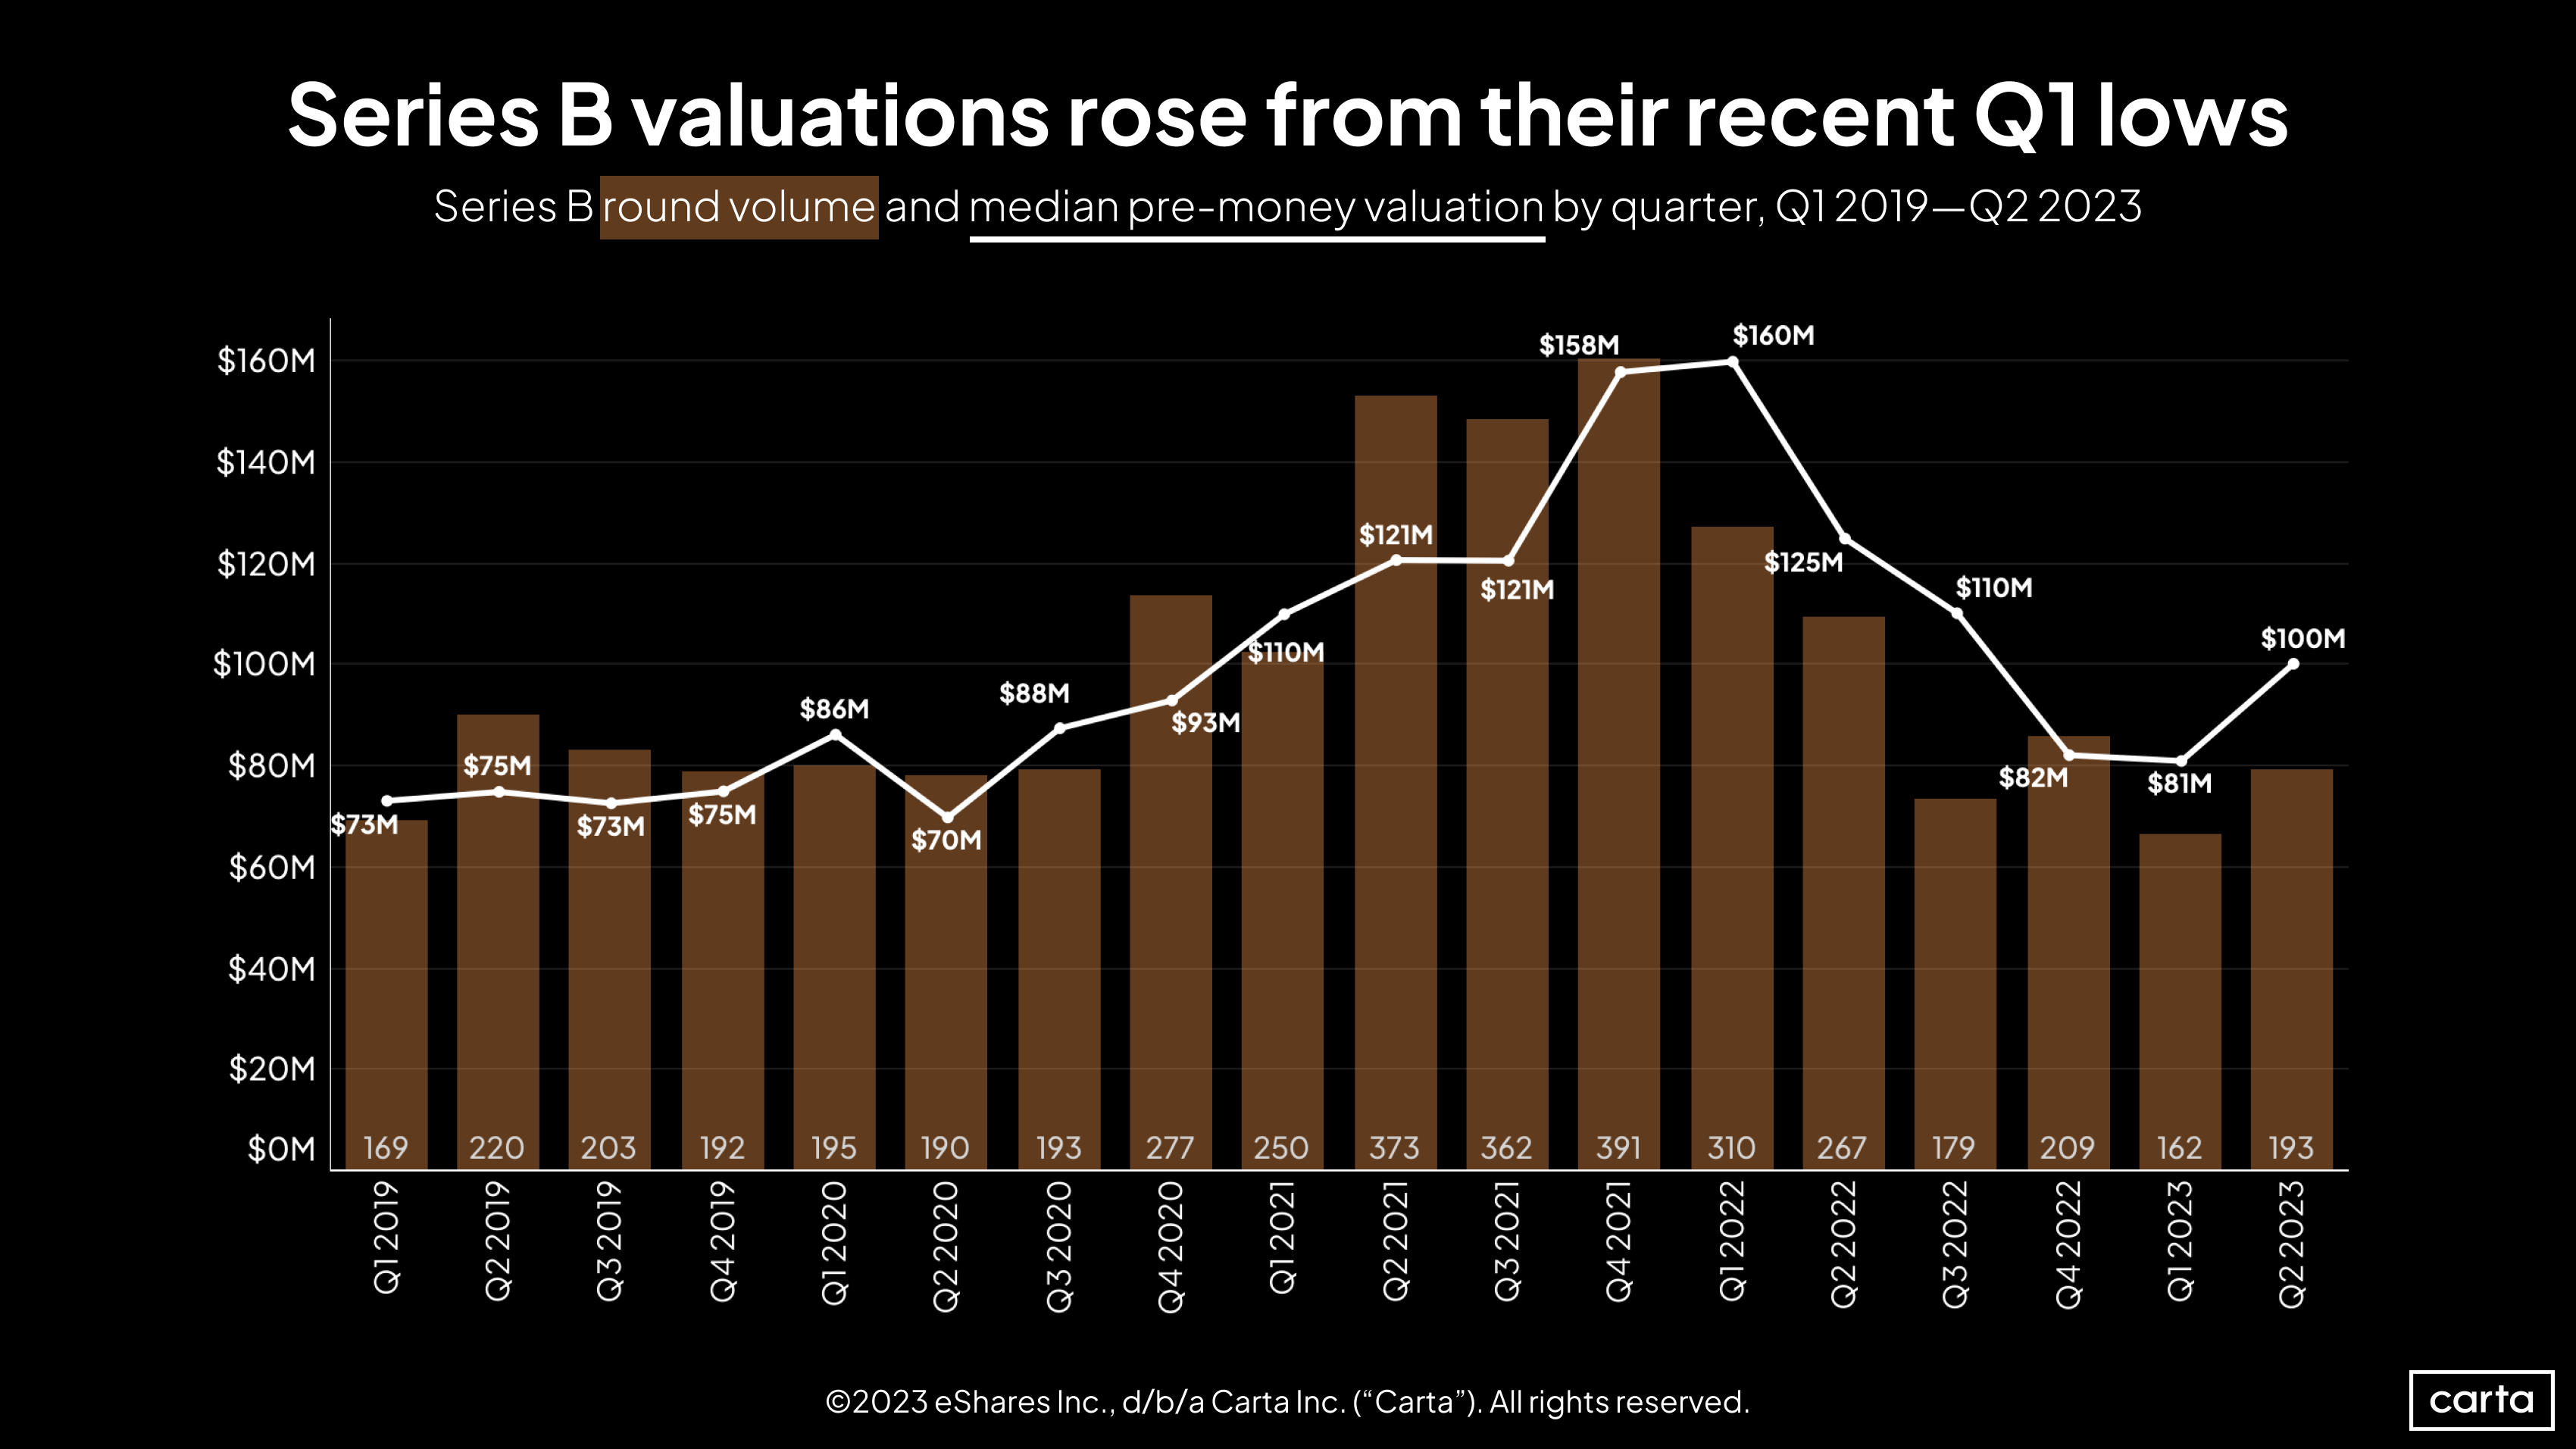 Series B round volume and median pre-money valuation by quarter, Q1 2019 - Q2 2023